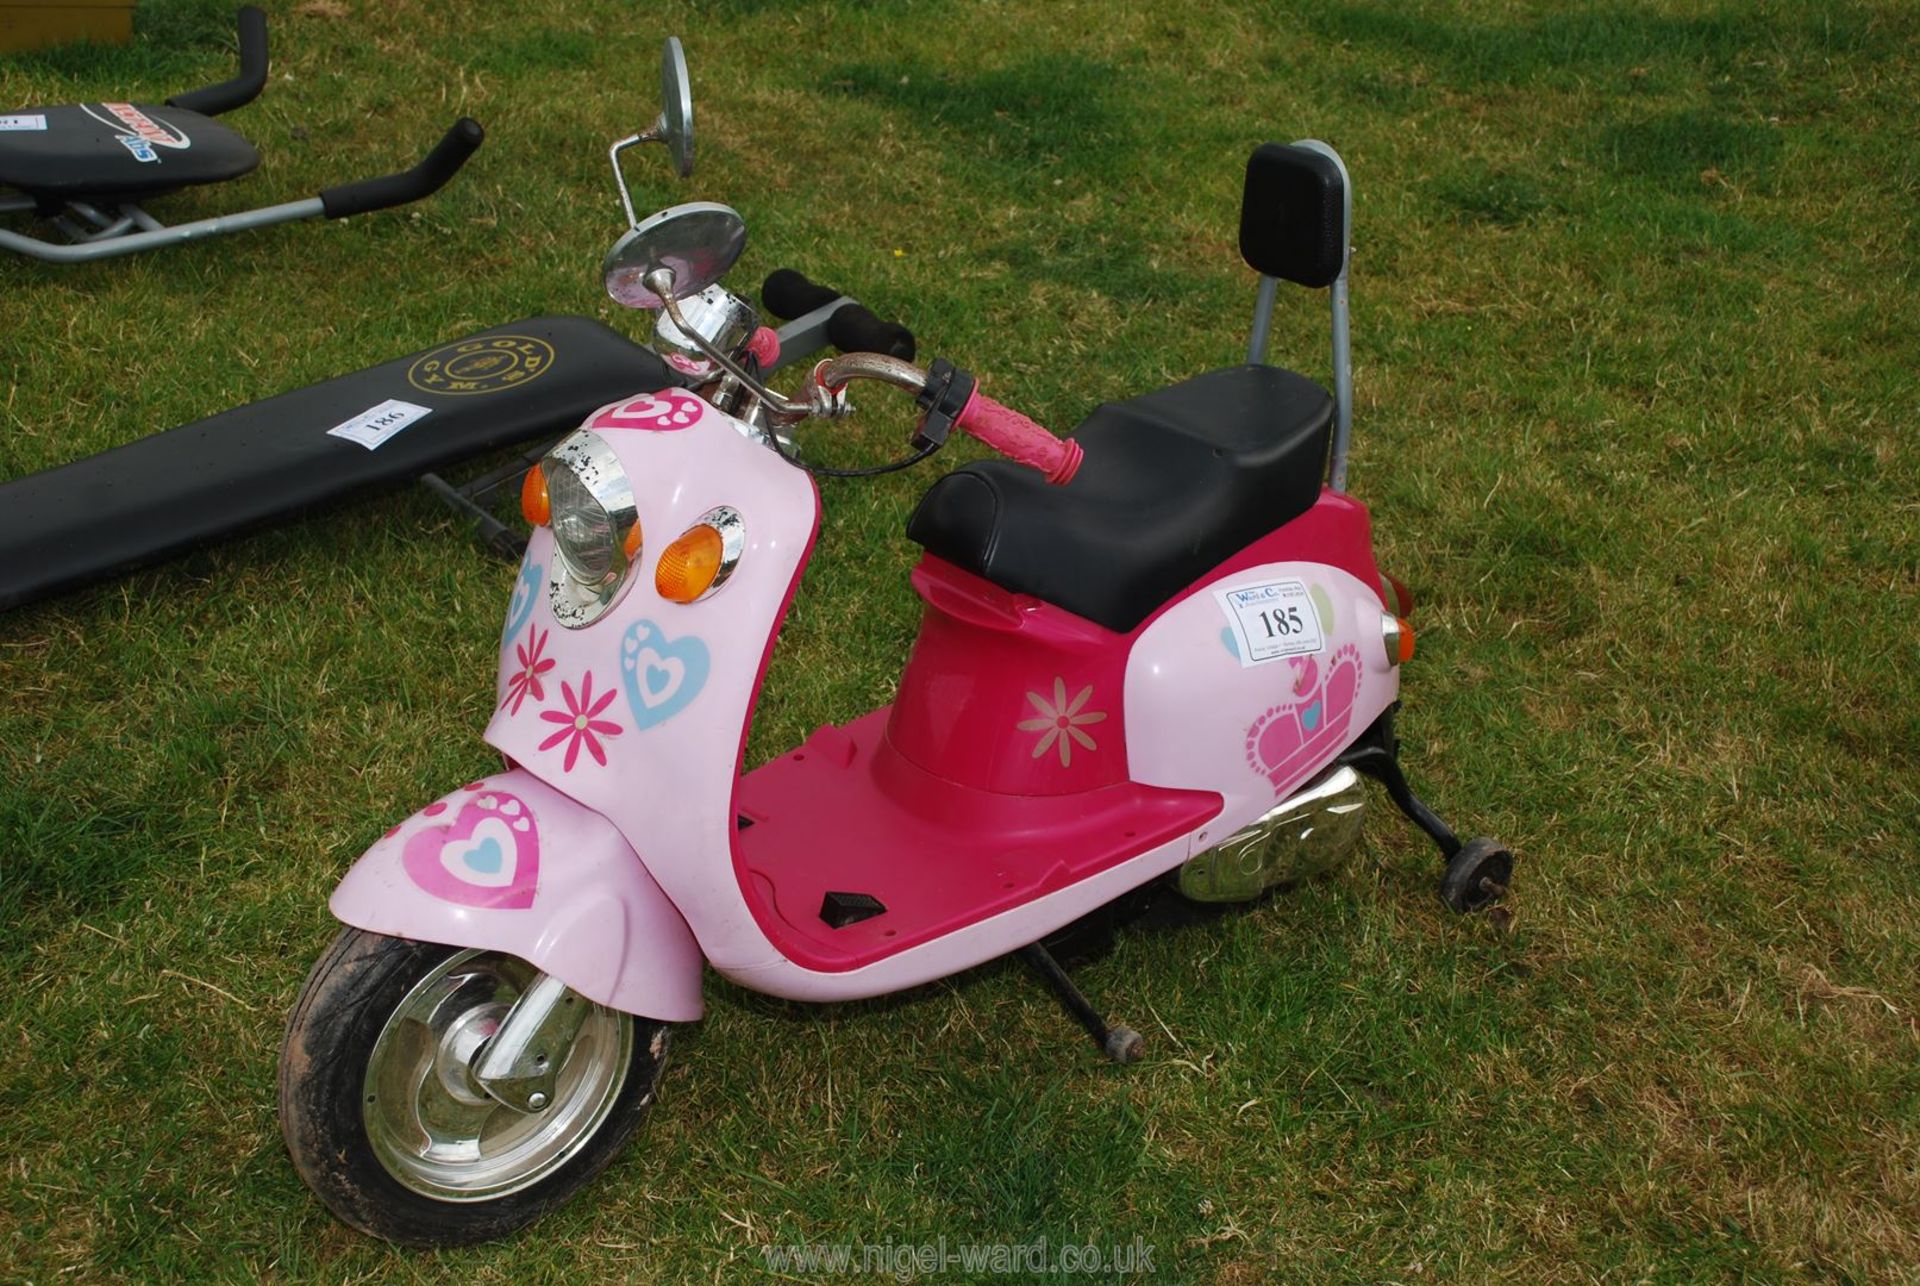 A child's motor scooter with stabilisers.